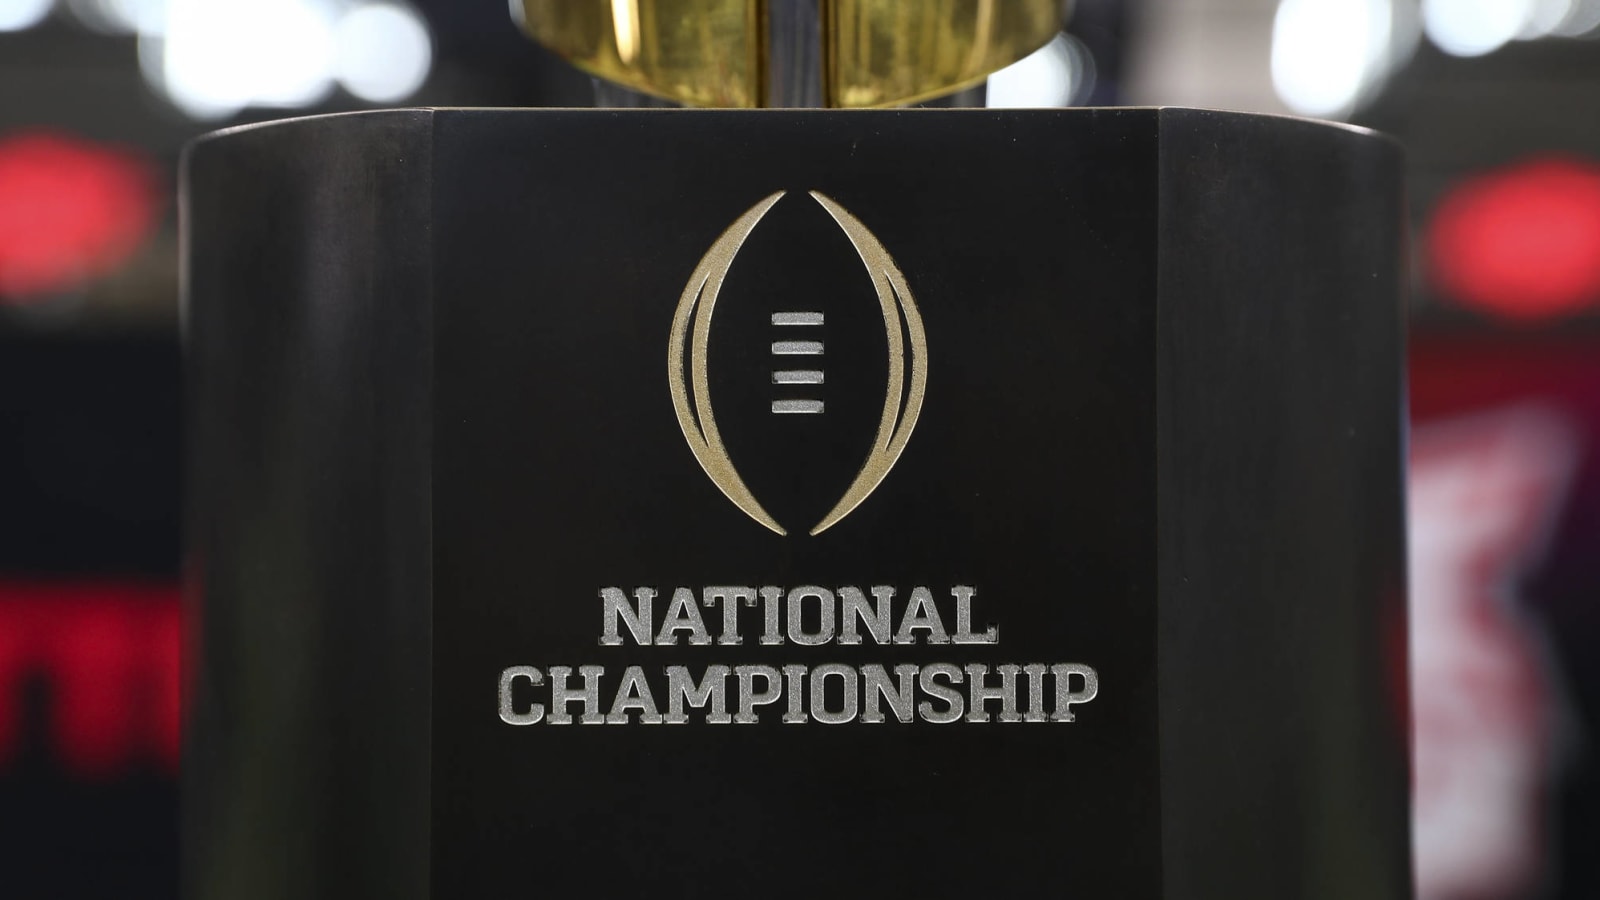 Conflicting reports emerge about CFP expansion